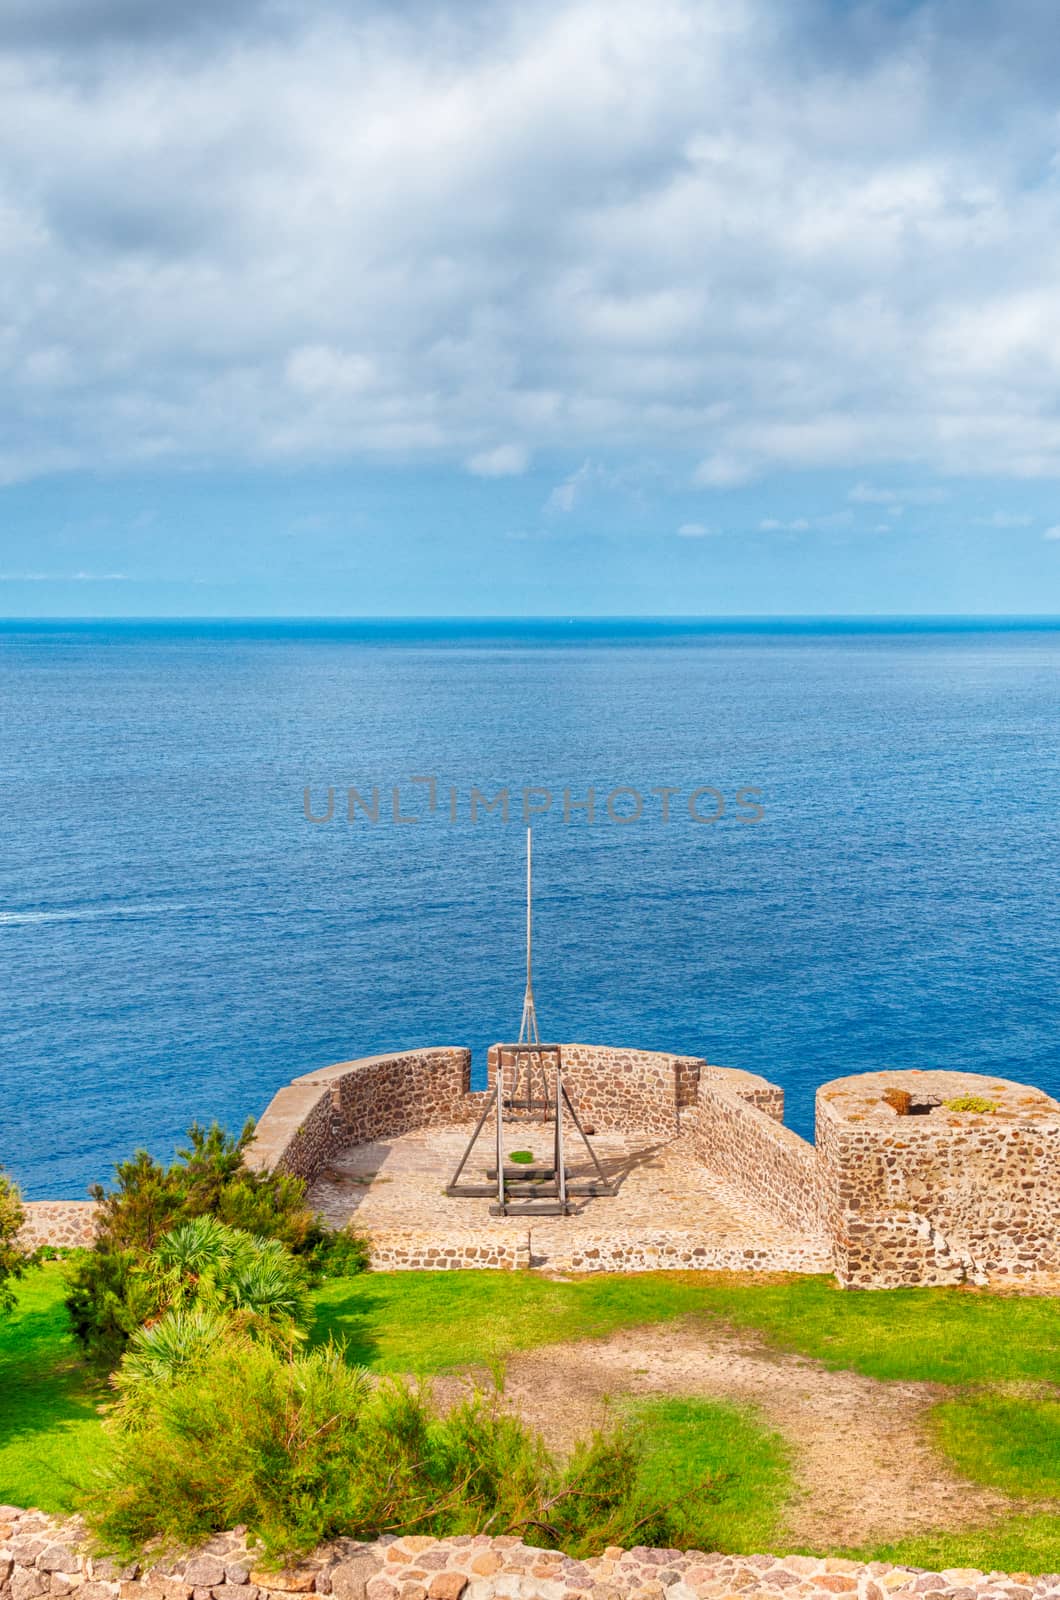 View from castelsardo old city by replica